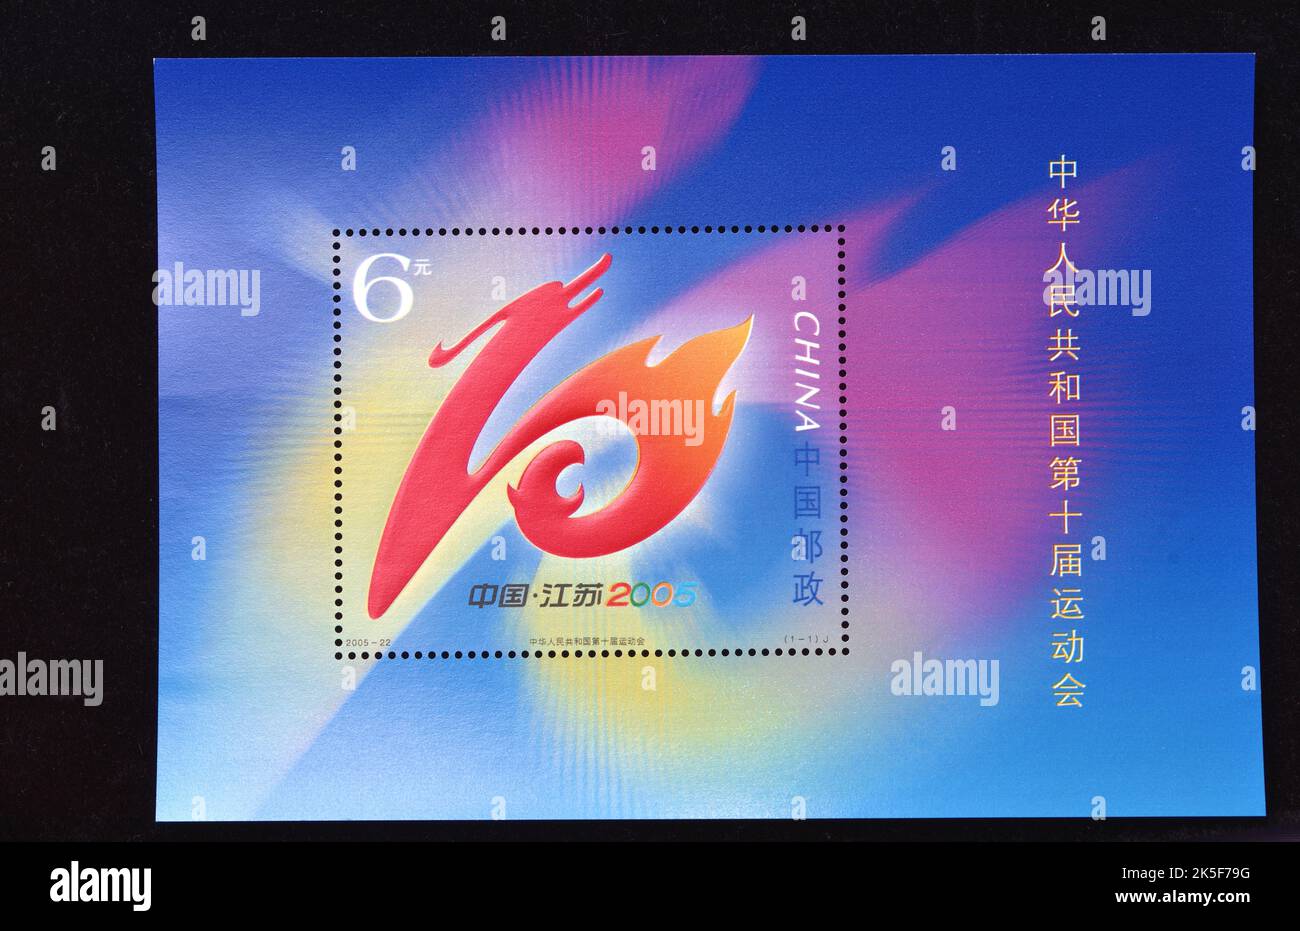 CHINA - CIRCA 2005: A stamp printed in China shows 2005-22, Scott 3457 The 10th National Games of the People's Repubic of China , circa 2005 Stock Photo